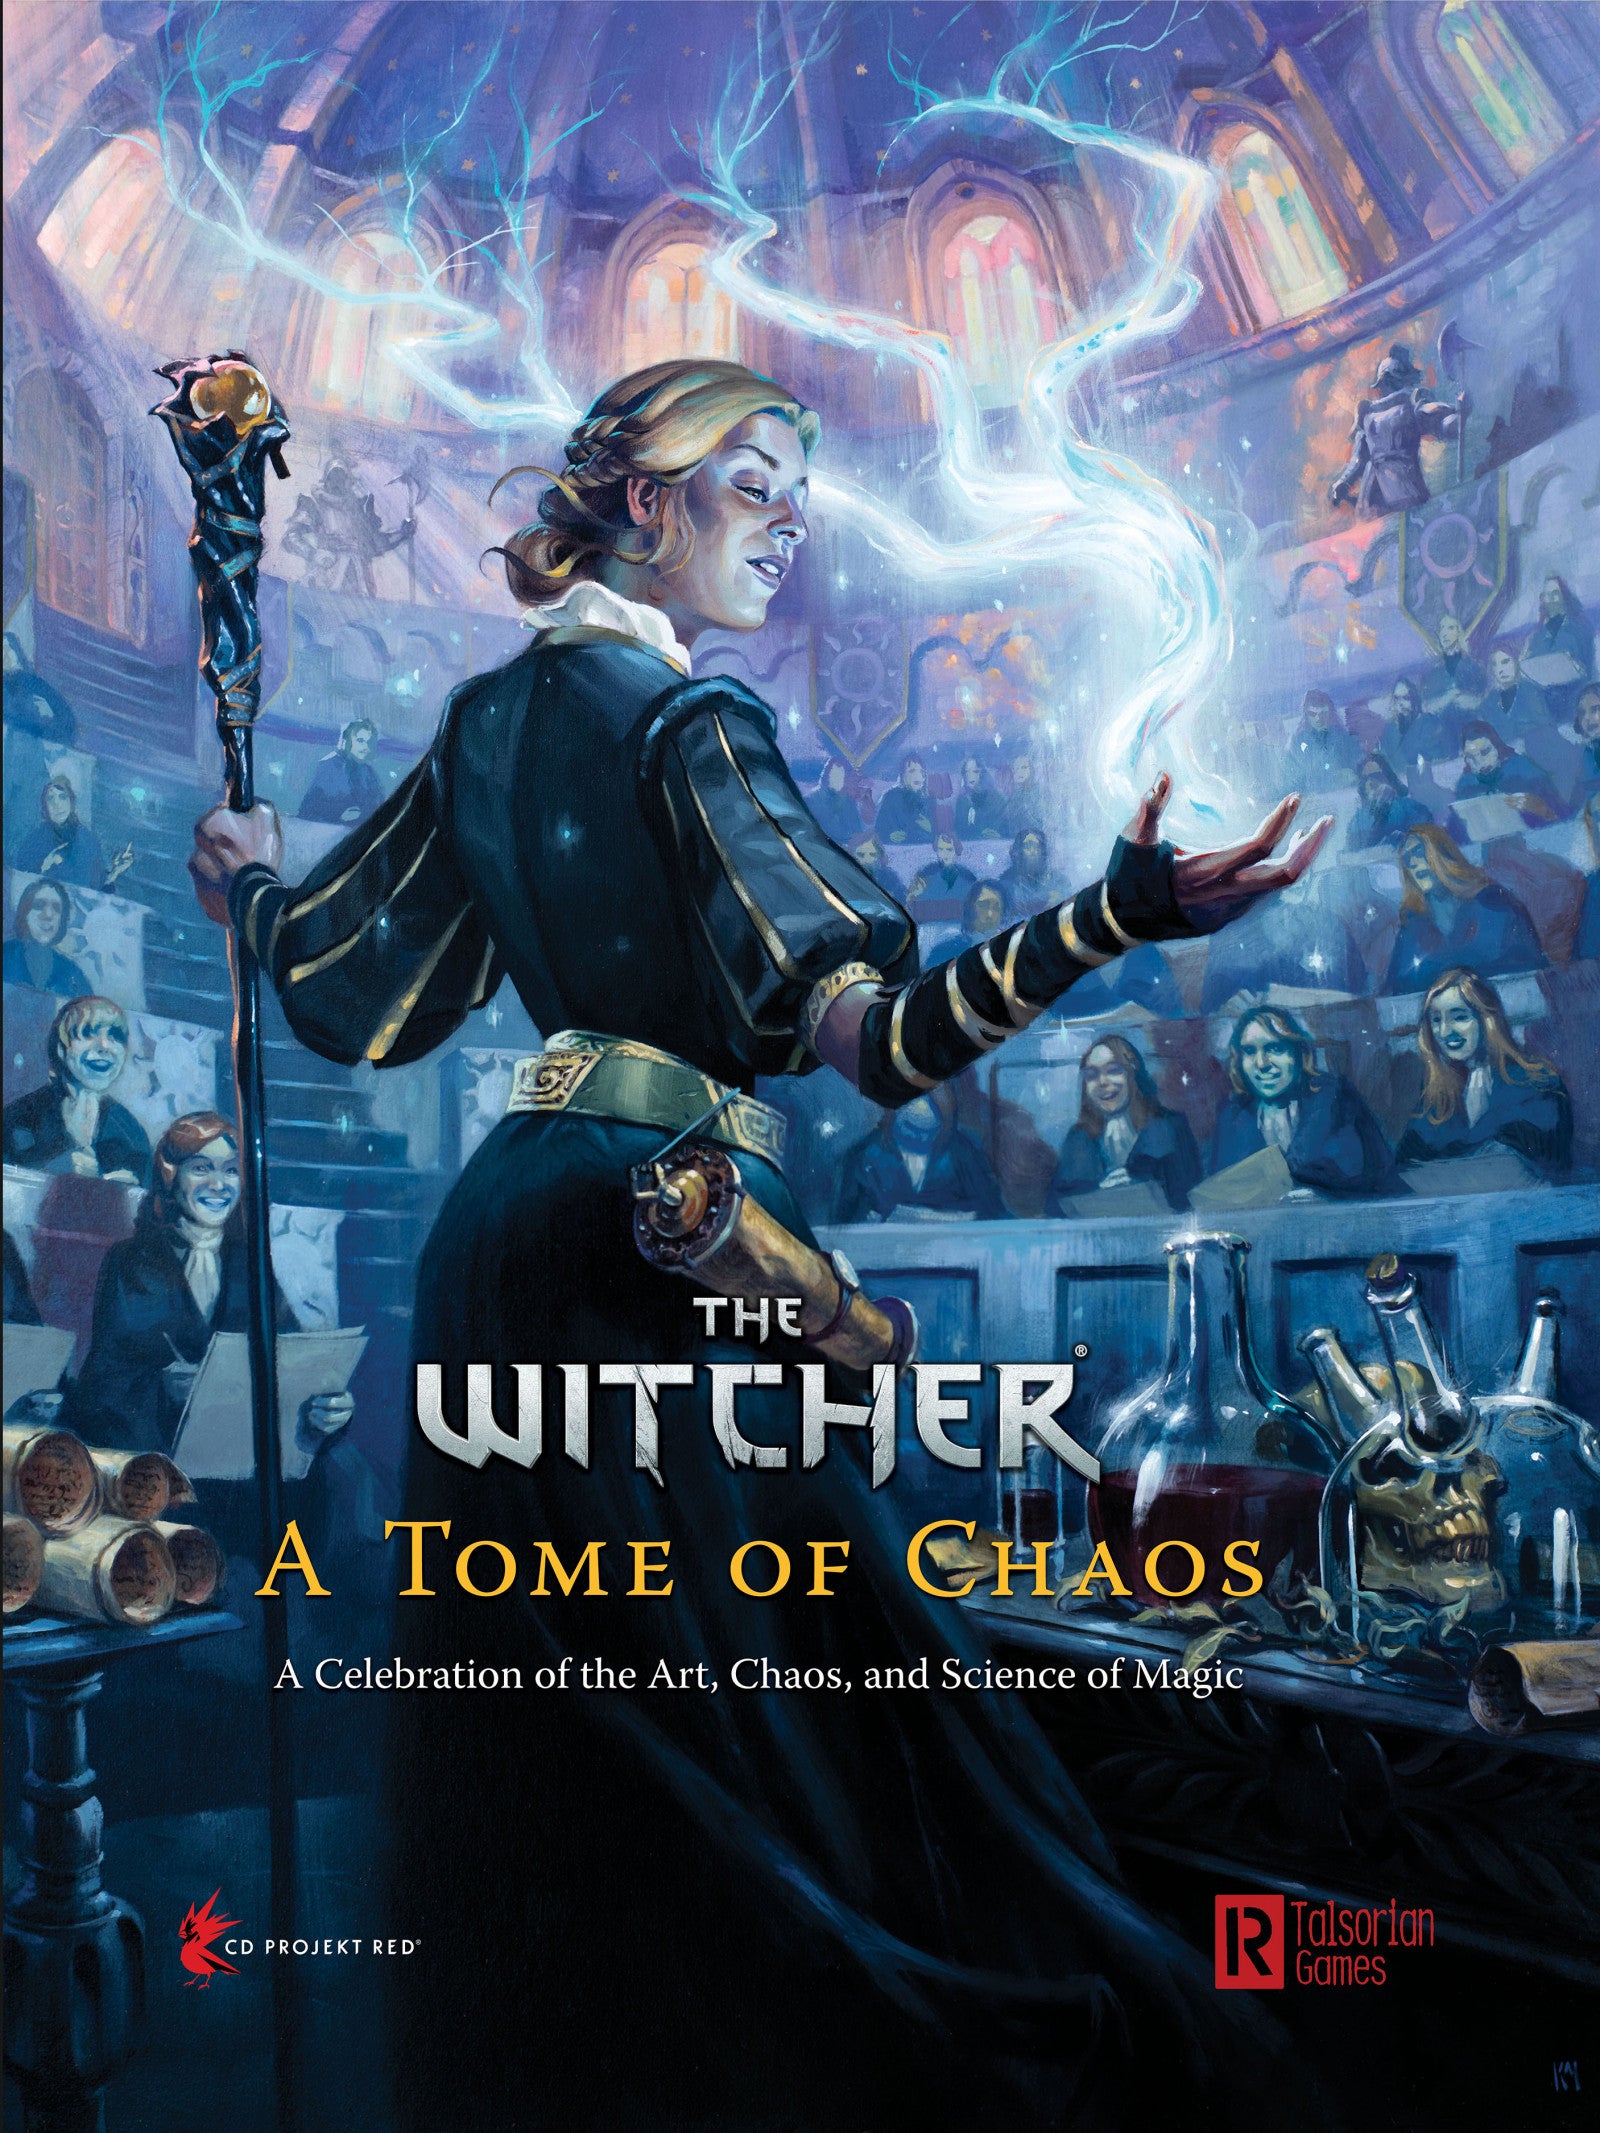 The Witcher RPG A Tome of Chaos